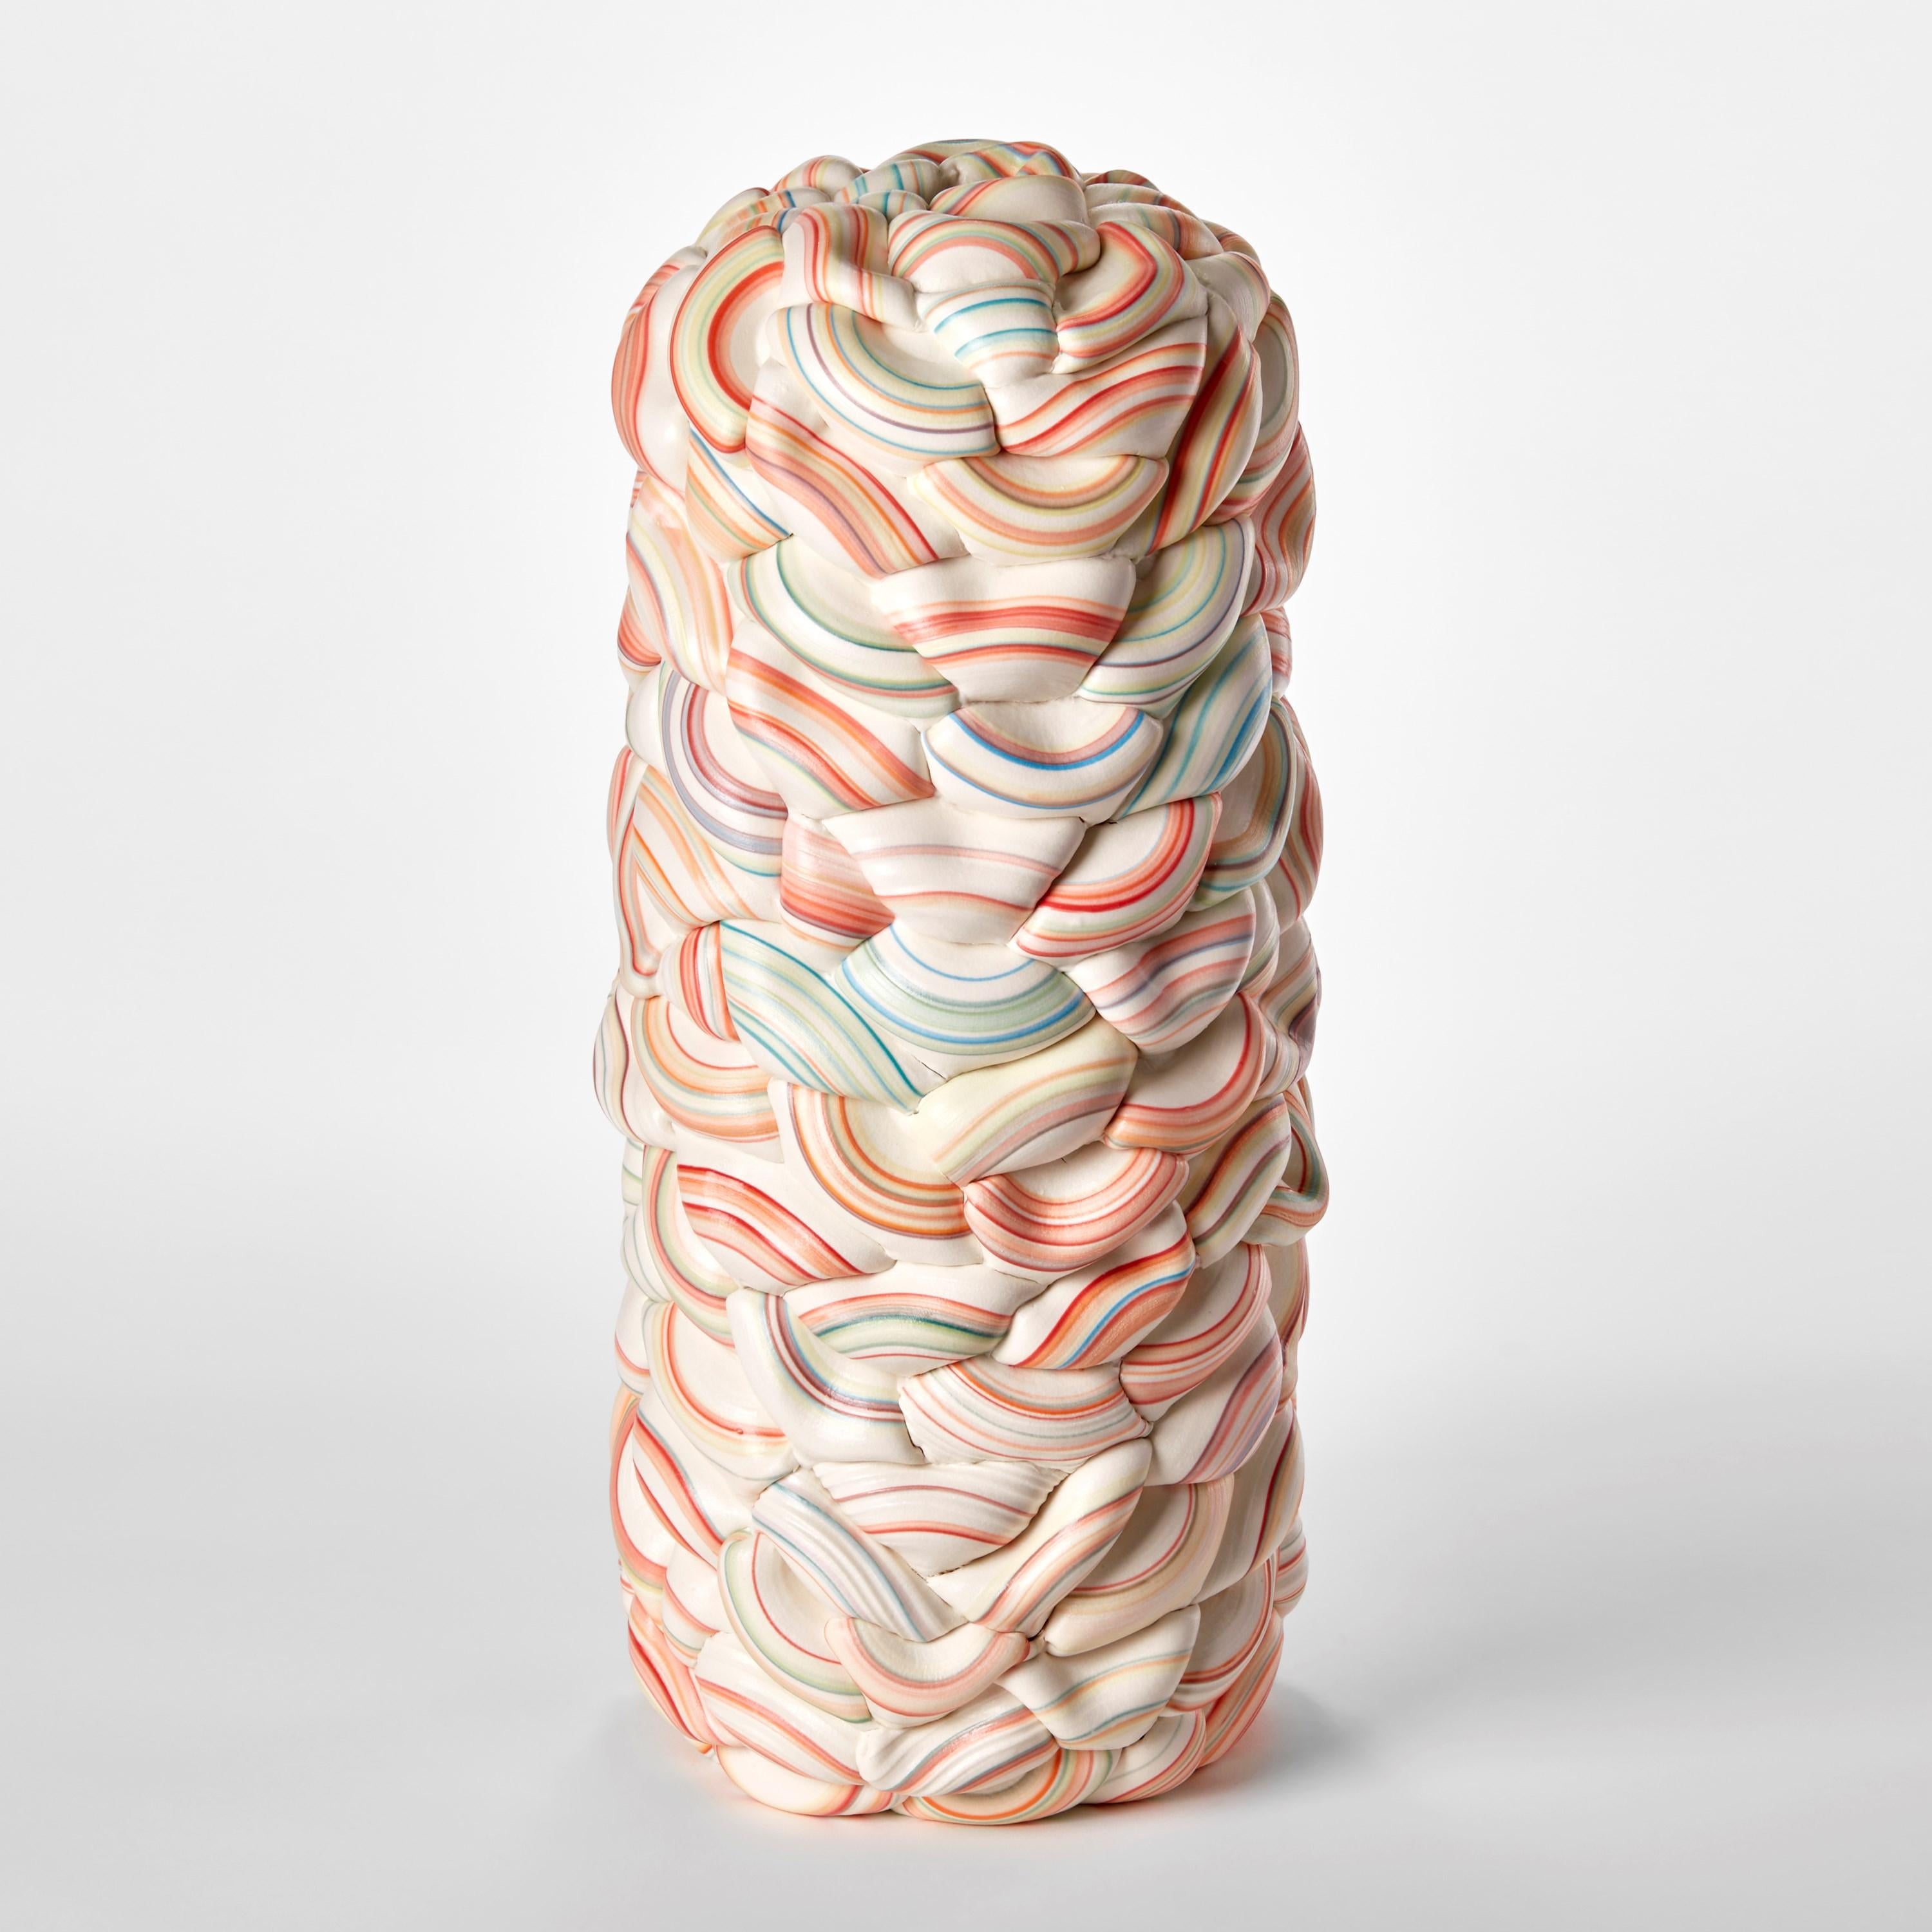 Hand-Crafted Striped Symmetry Fold IV, woven candy cane porcelain vessel by Steven Edwards For Sale